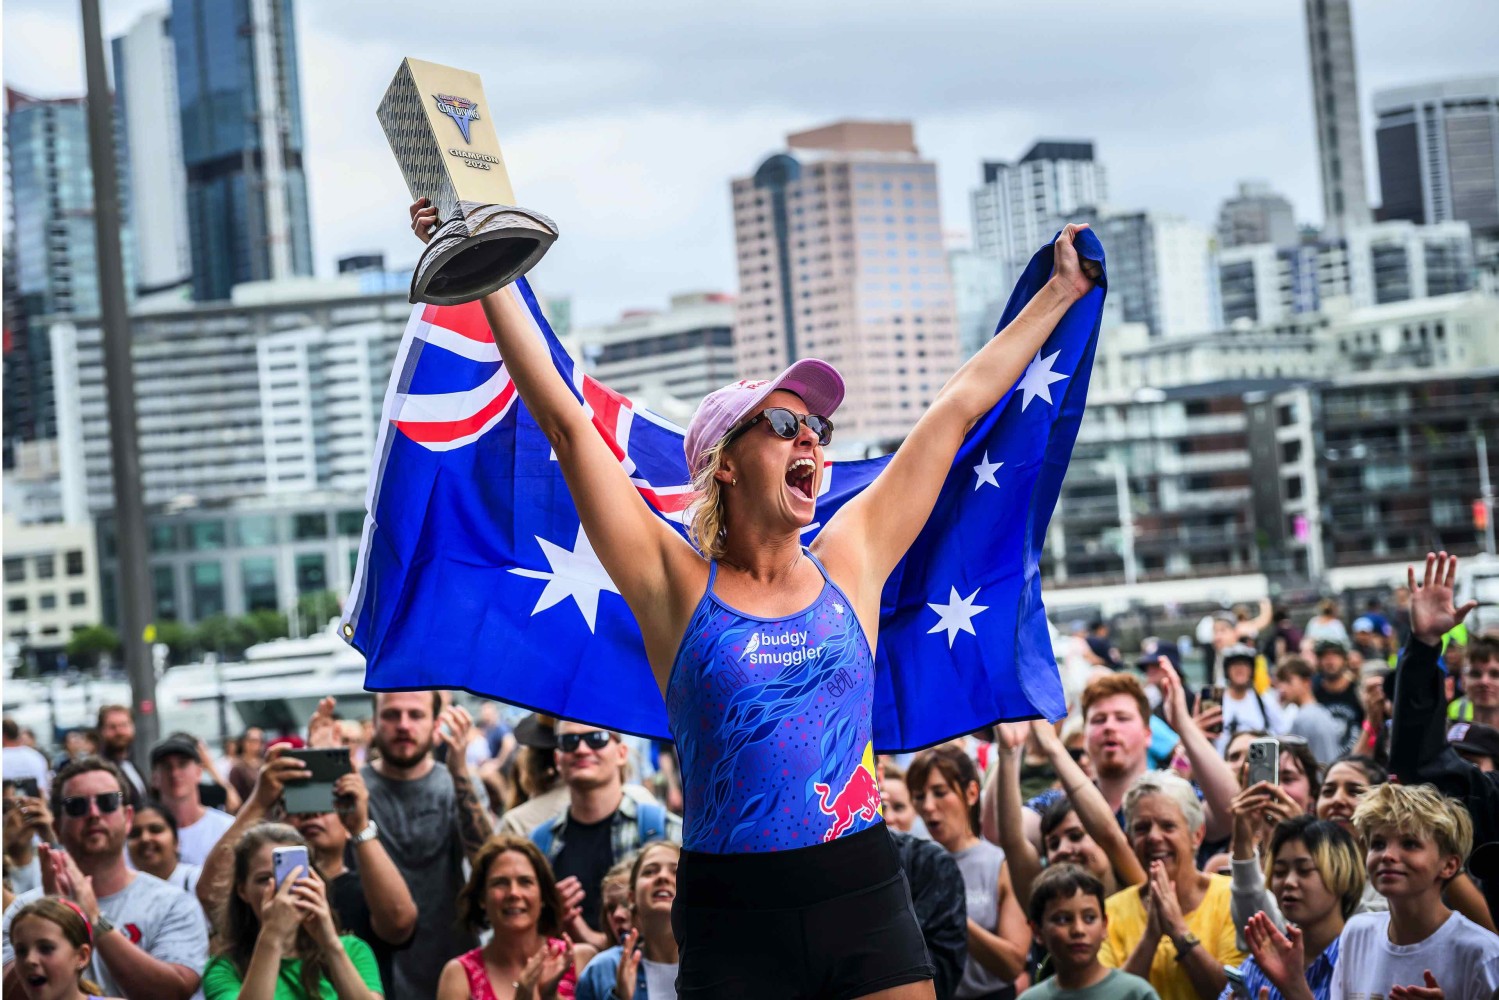 Australia’s Rhiannan Iffland earned victory at the final stop of the 2023 Red Bull Cliff Diving World Series in New Zealand on Sunday, sealing the series title in style in front of more than 55,000 spectators across two competition days at windy Waitemata Harbour.